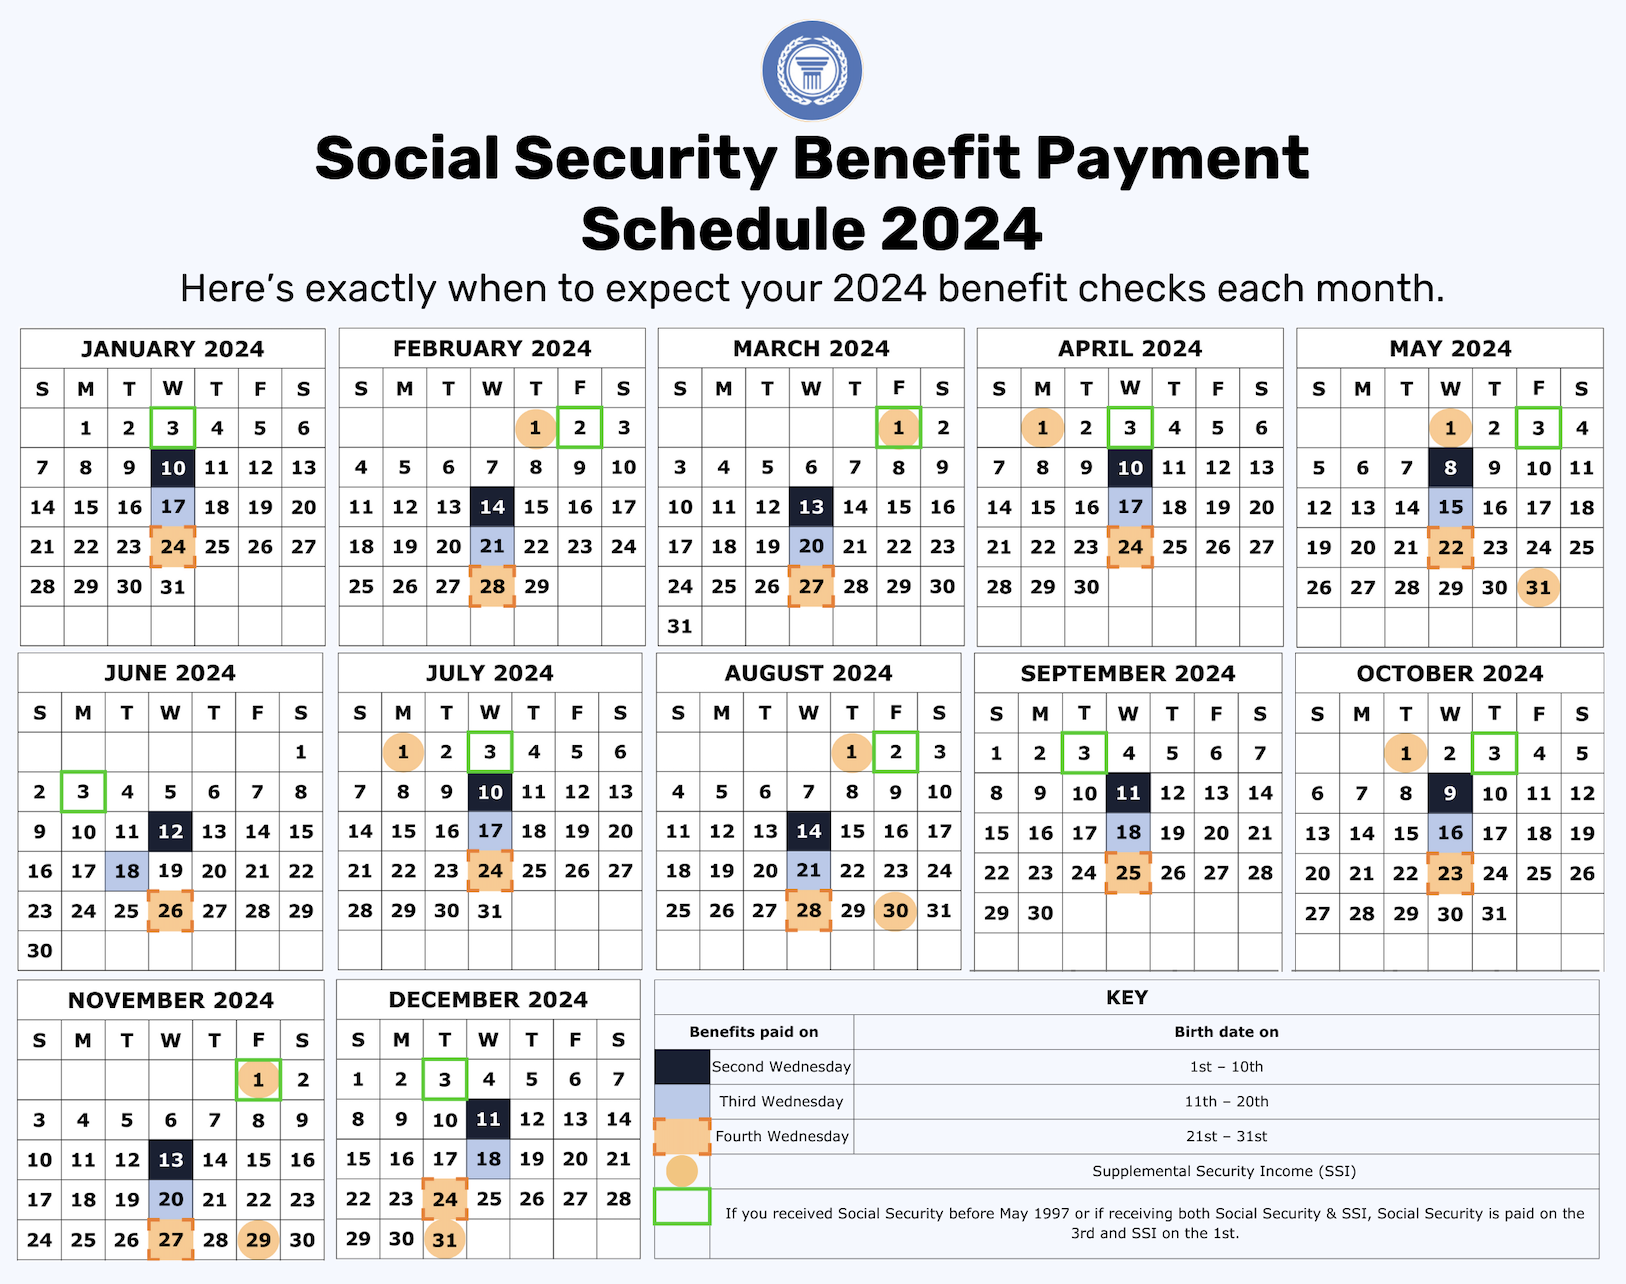 Social Security Benefit Payment Schedule for 2024